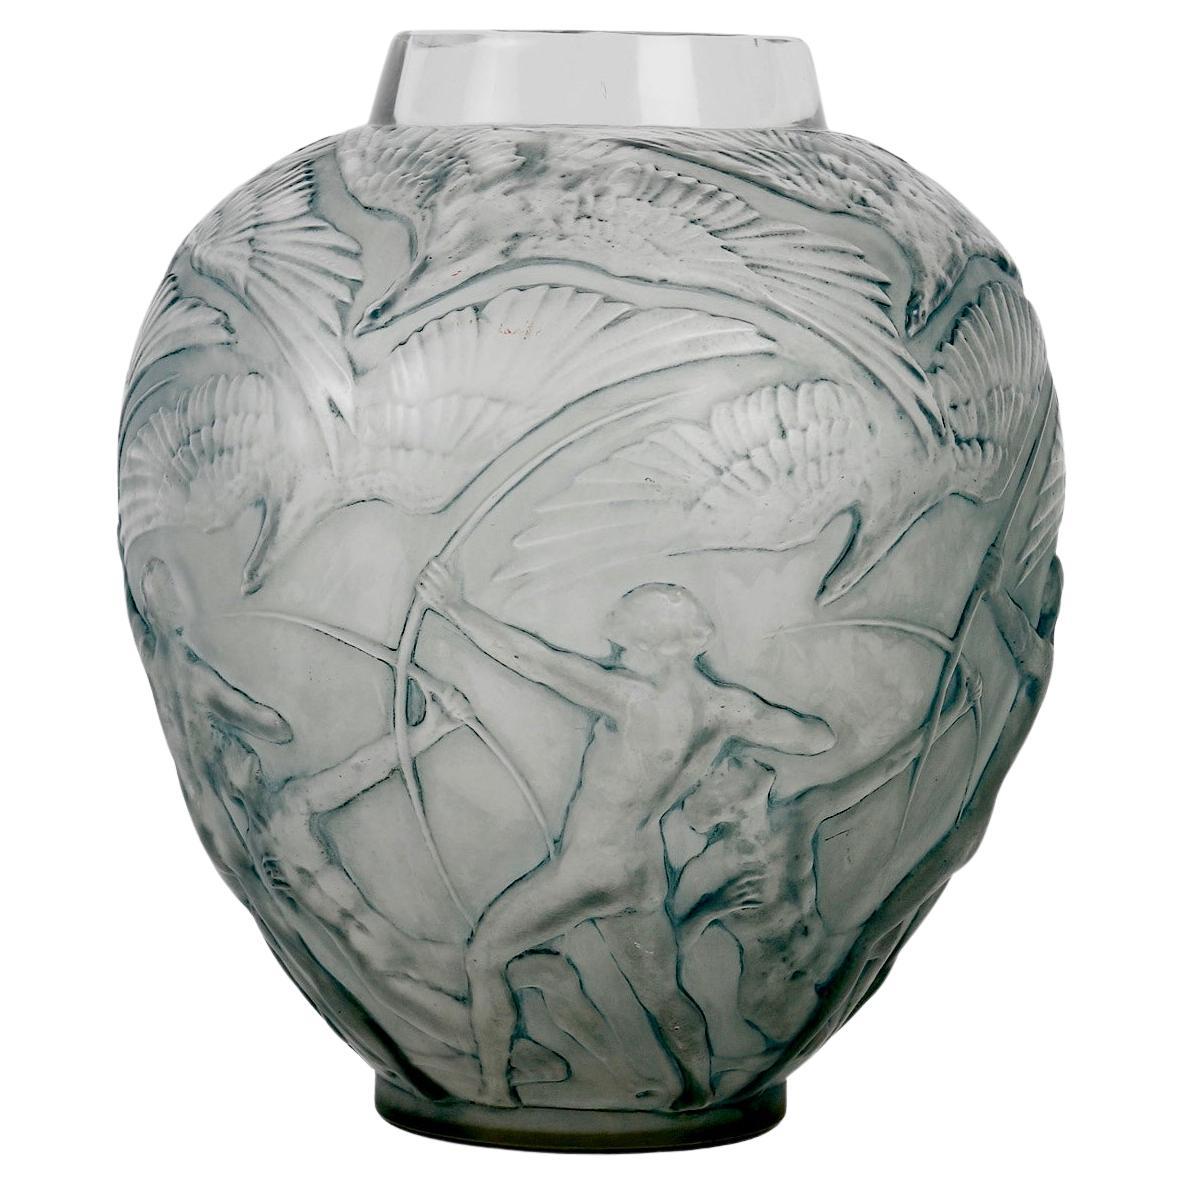 1921 René Lalique Vase Archers Frosted Glass with Blue Patina